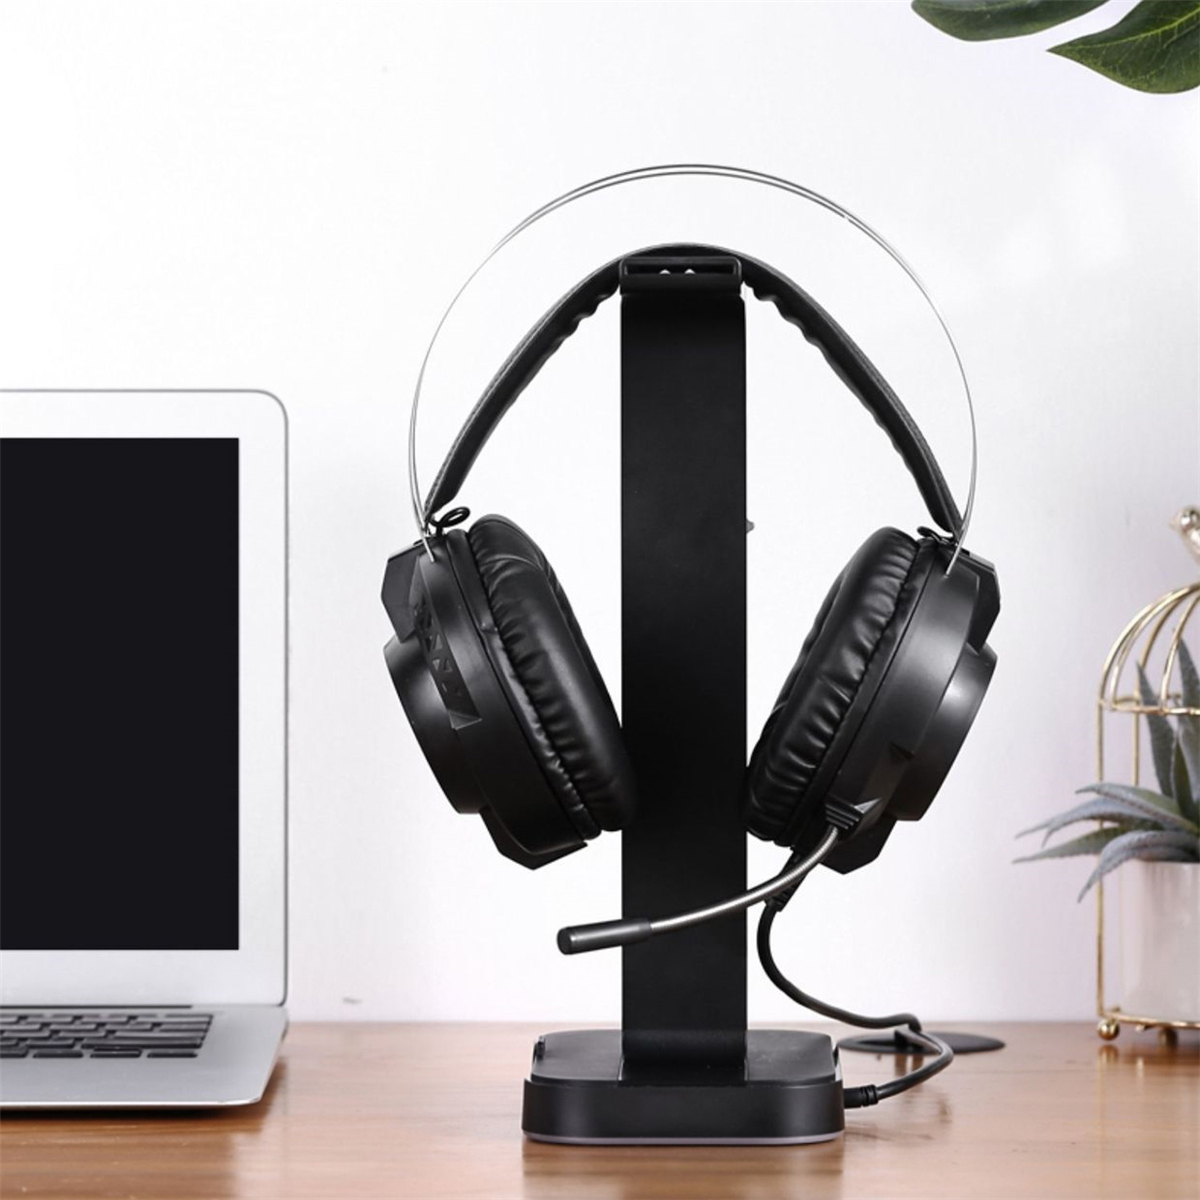 Inphic-H100-Headset-Stand-Dual-USB-Ports-Colorful-Light-Base-Headphone-Hanger-Headset-Mount-Holder-O-1742022-3